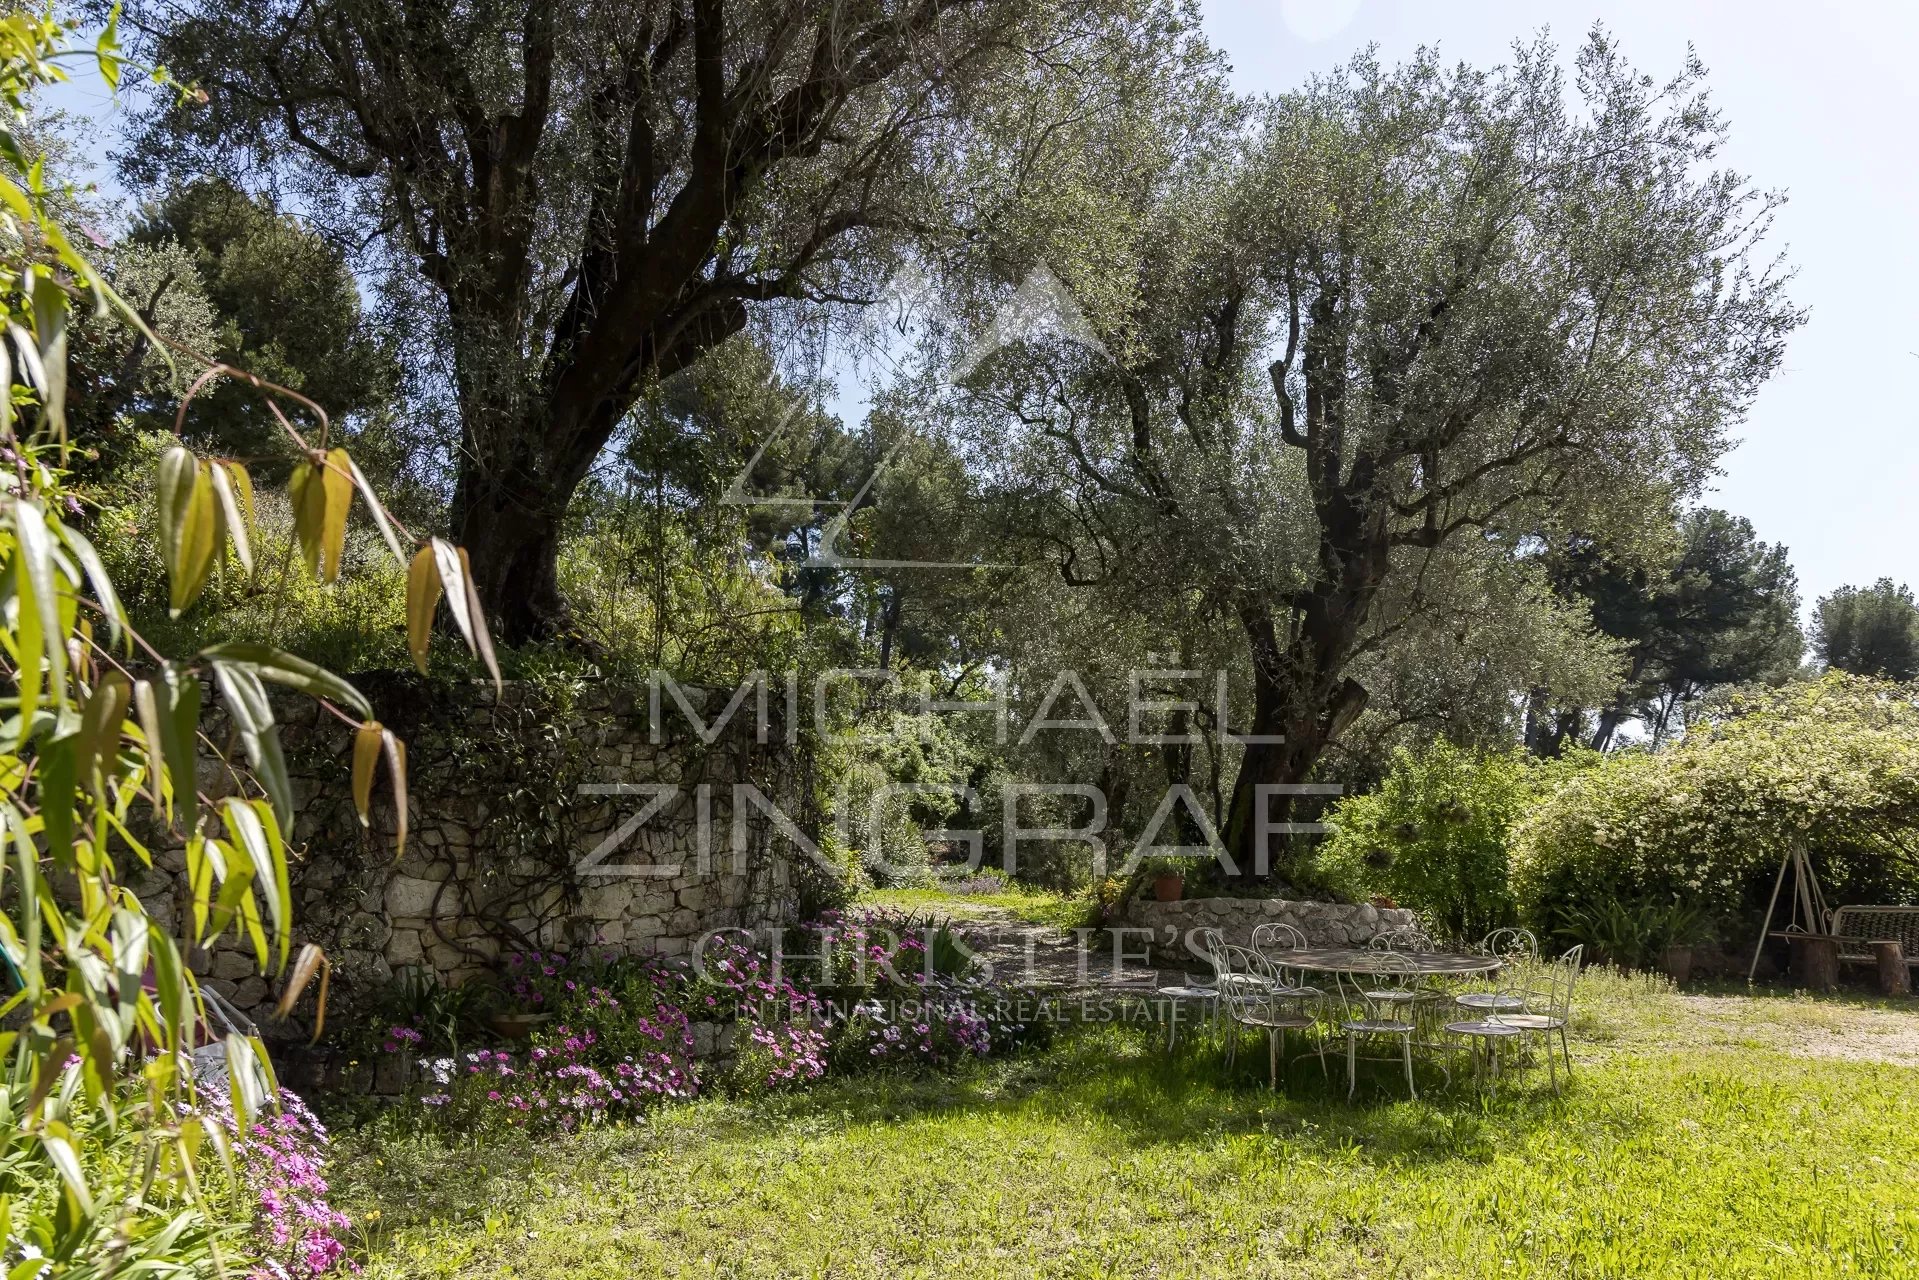 Bastide Property for sale in Gairaut Nice